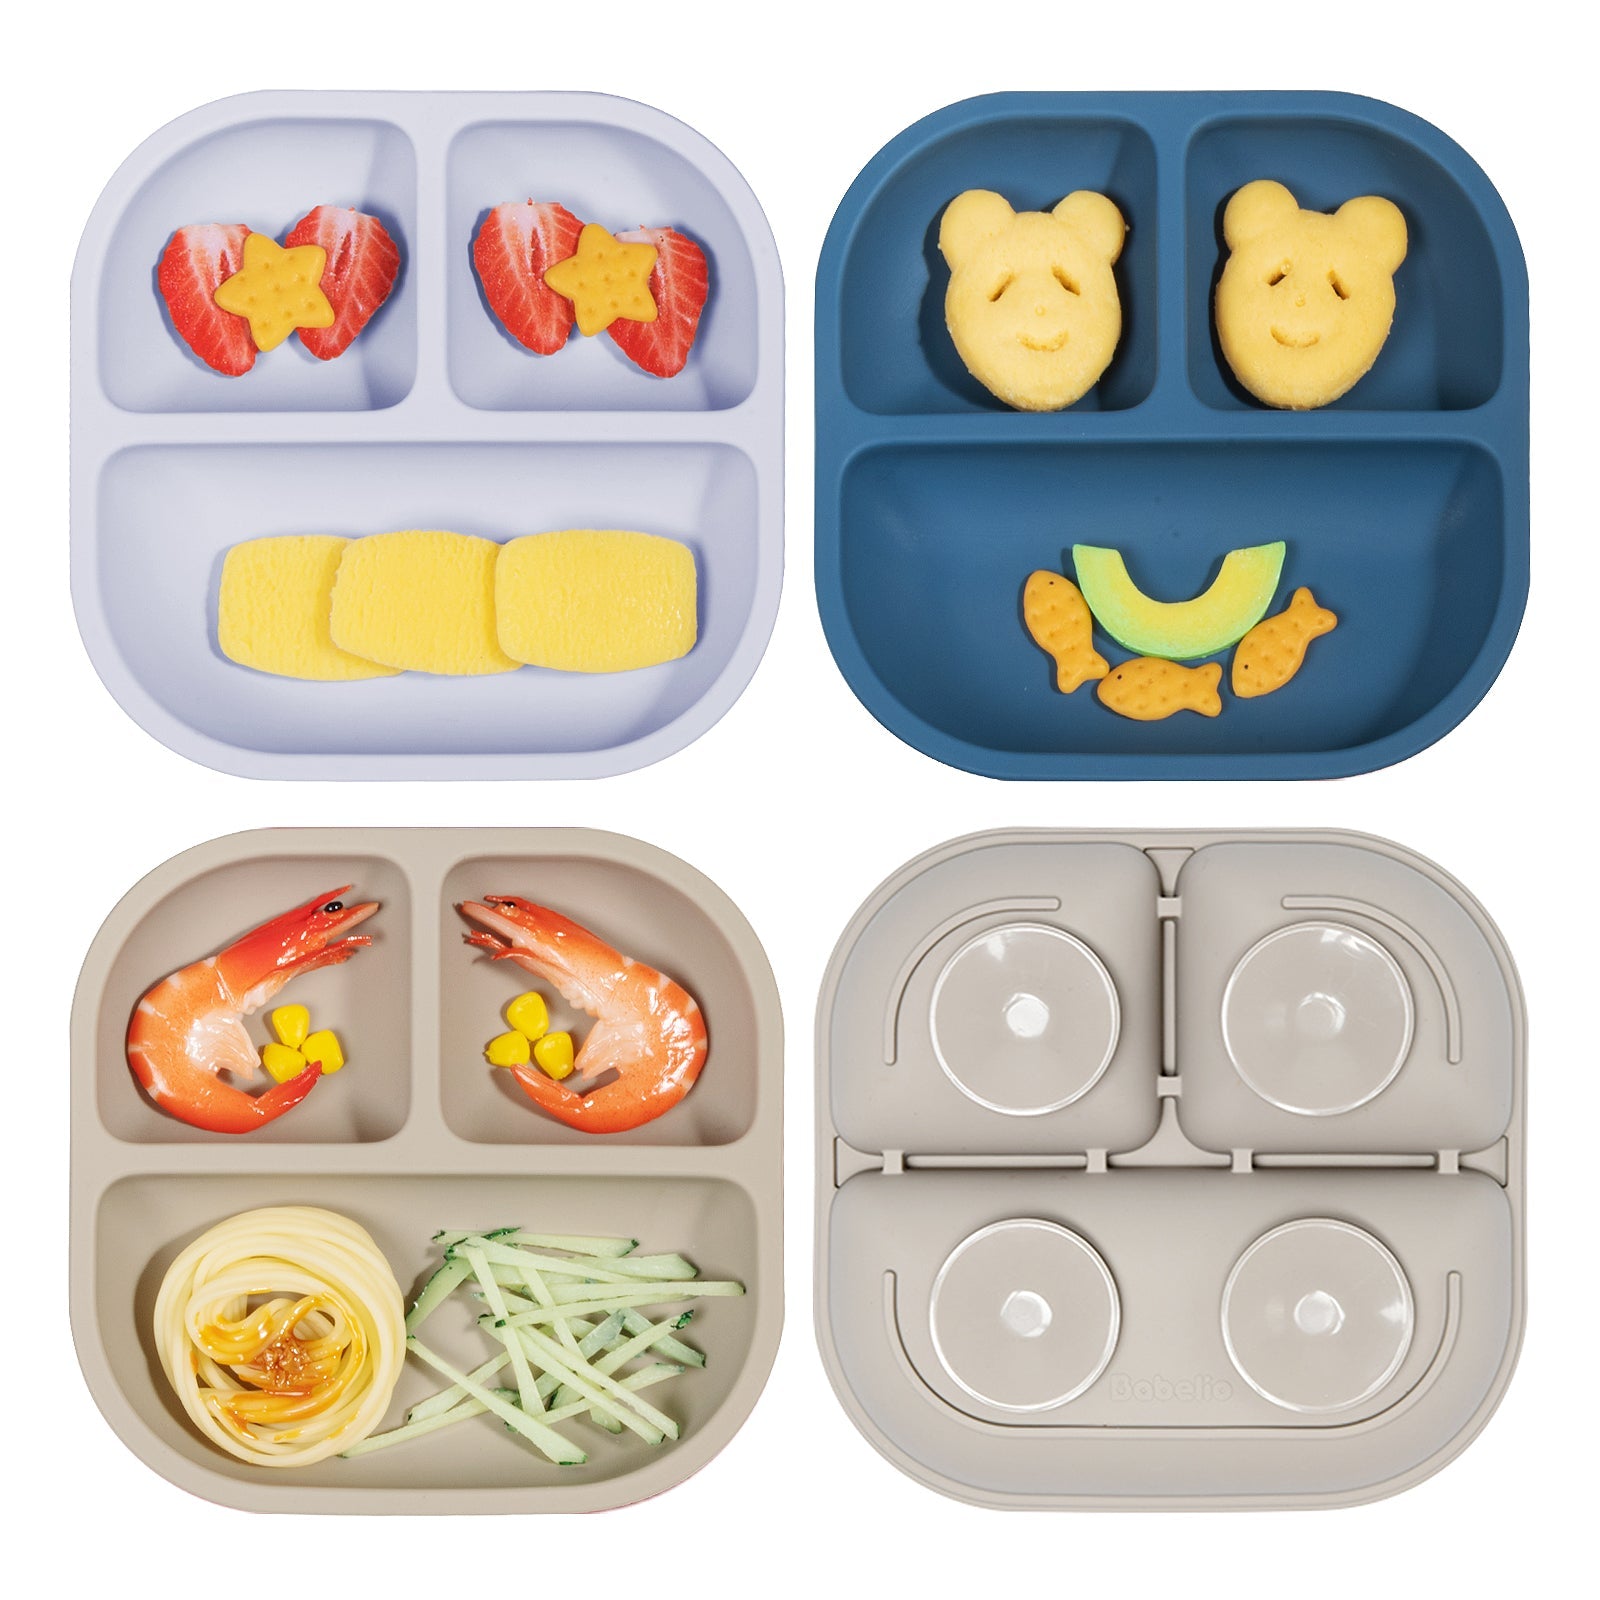 Babelio Powerful Suction Plates for Baby and Toddler, Stay Put with 4 Suction Cups, 3 Pack - babeliobaby